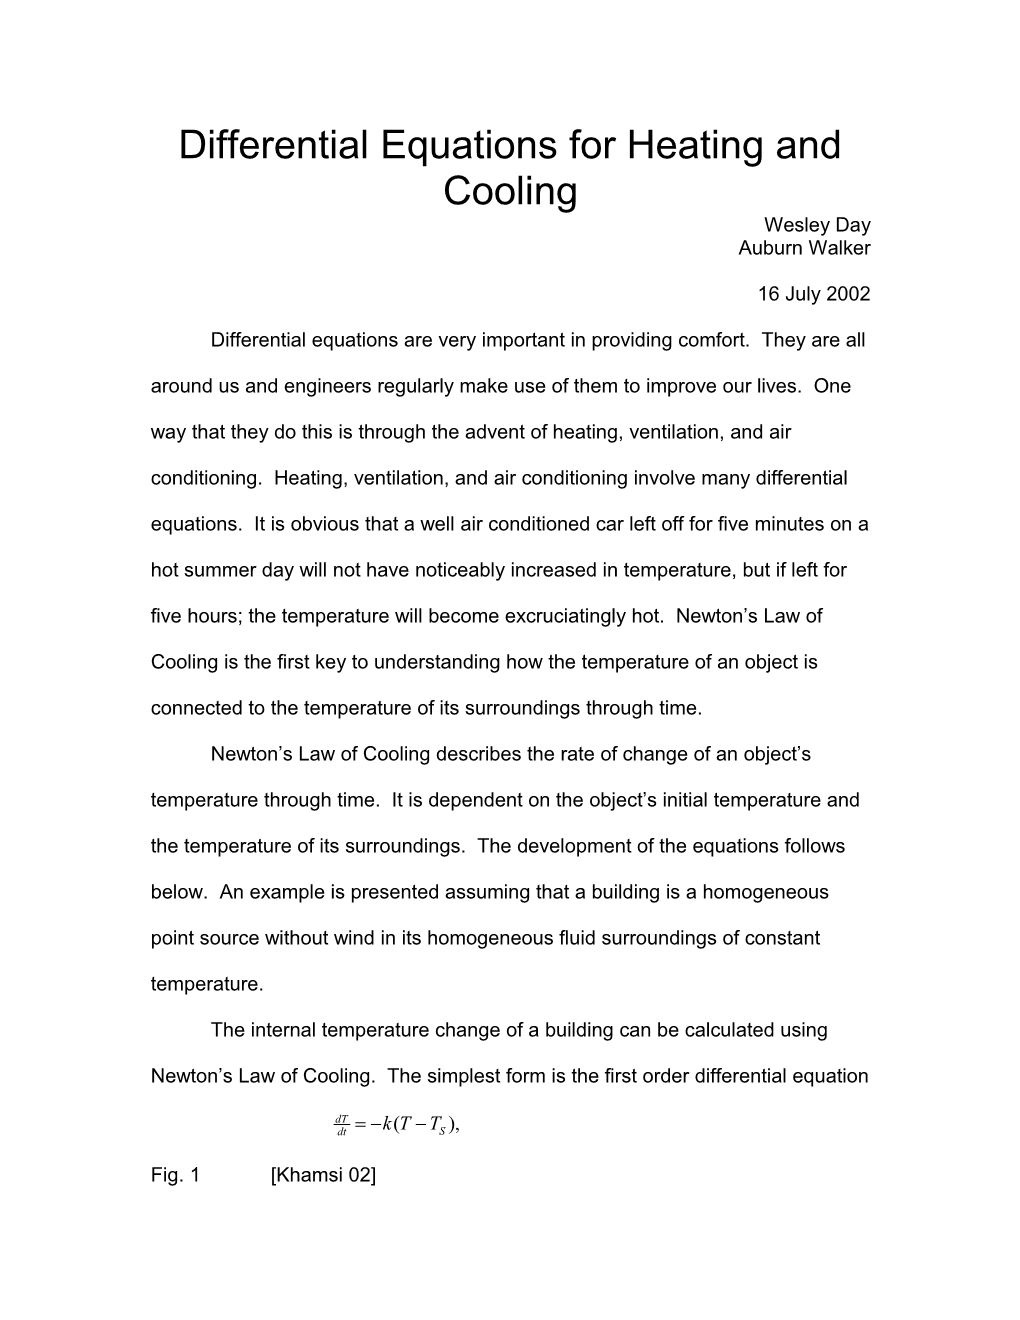 Differential Equations for Heating and Cooling